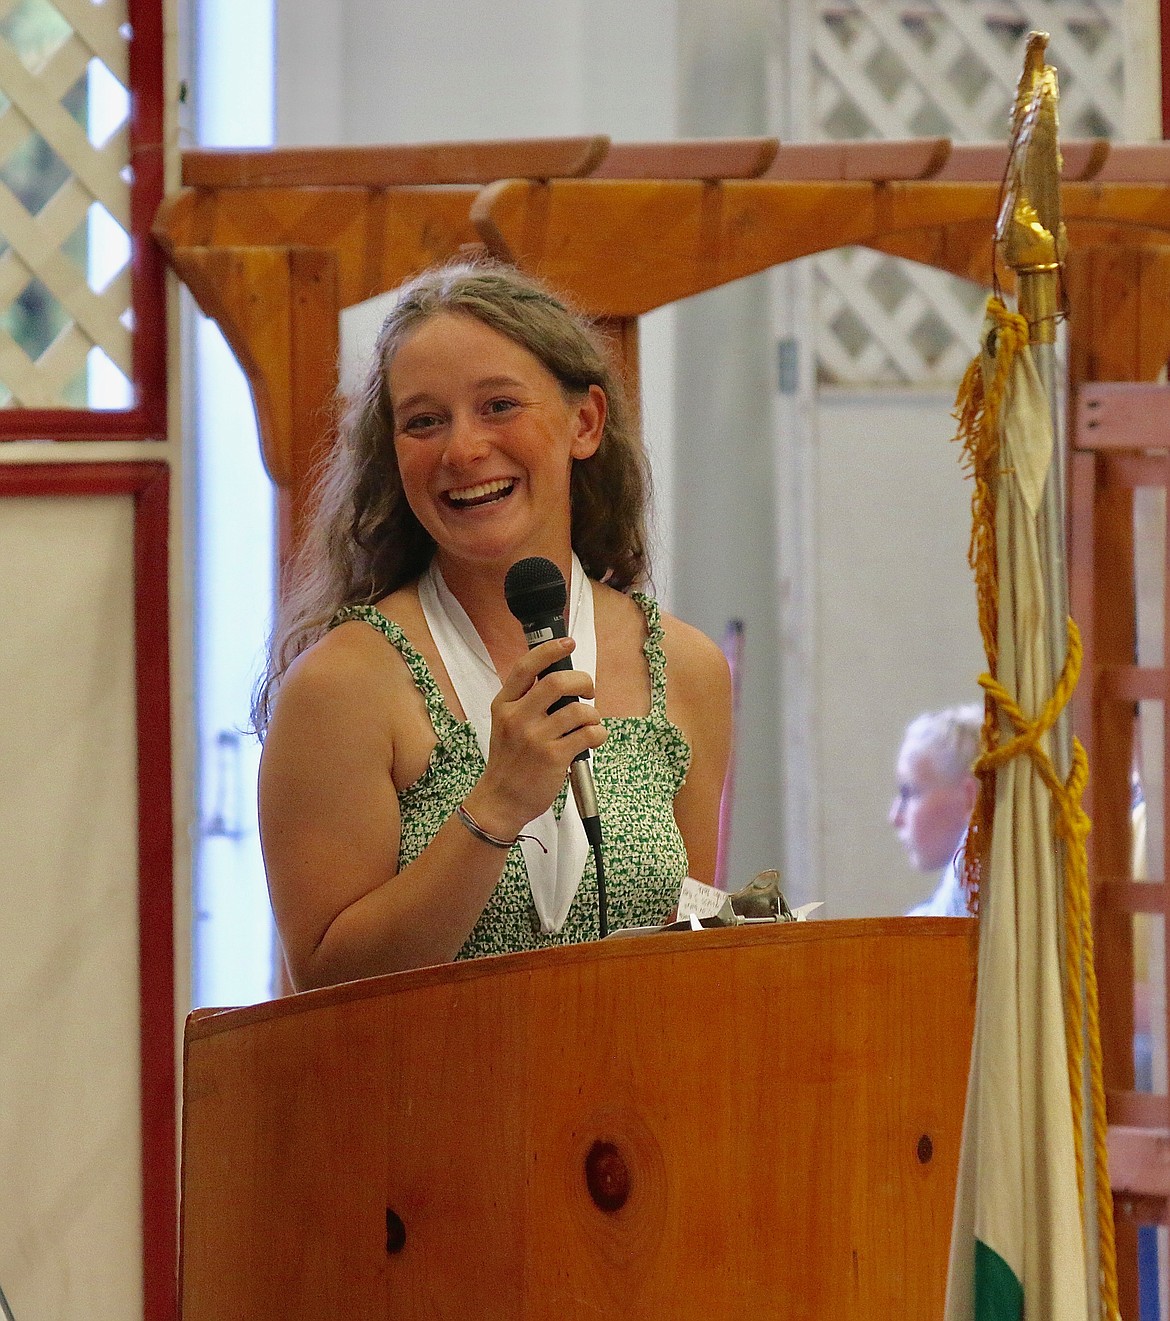 Bonners Ferry's Distinguished Young Woman for 2022, Leah Moellemer updated the community on her service projects at the Opening Cermonies of the 102nd Boundary County Fair.